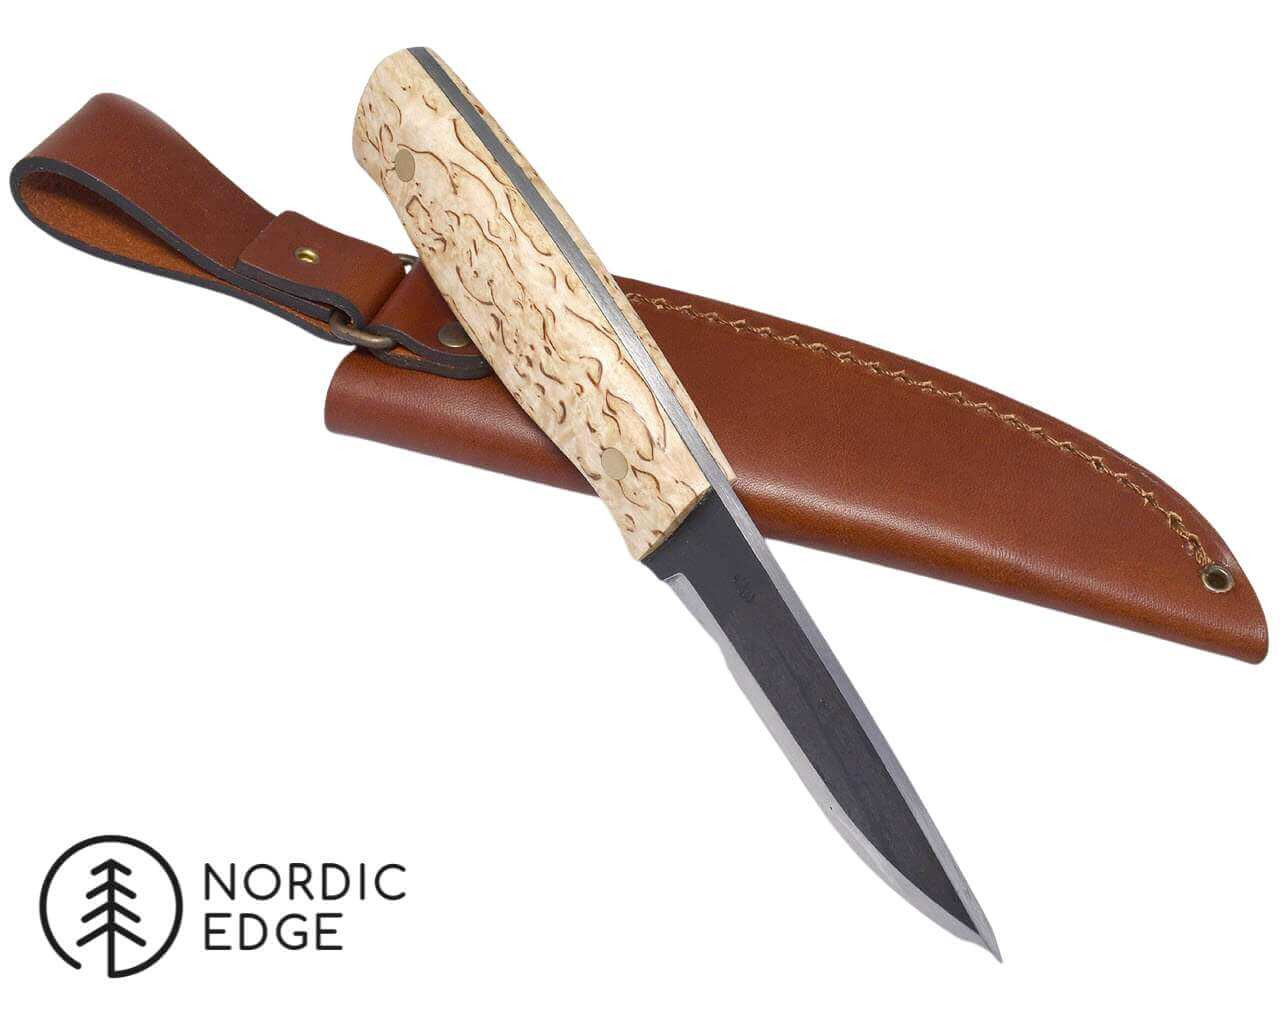 Making the Polar Whittler knife making kit with Silver Birch handle -  Nordic Edge